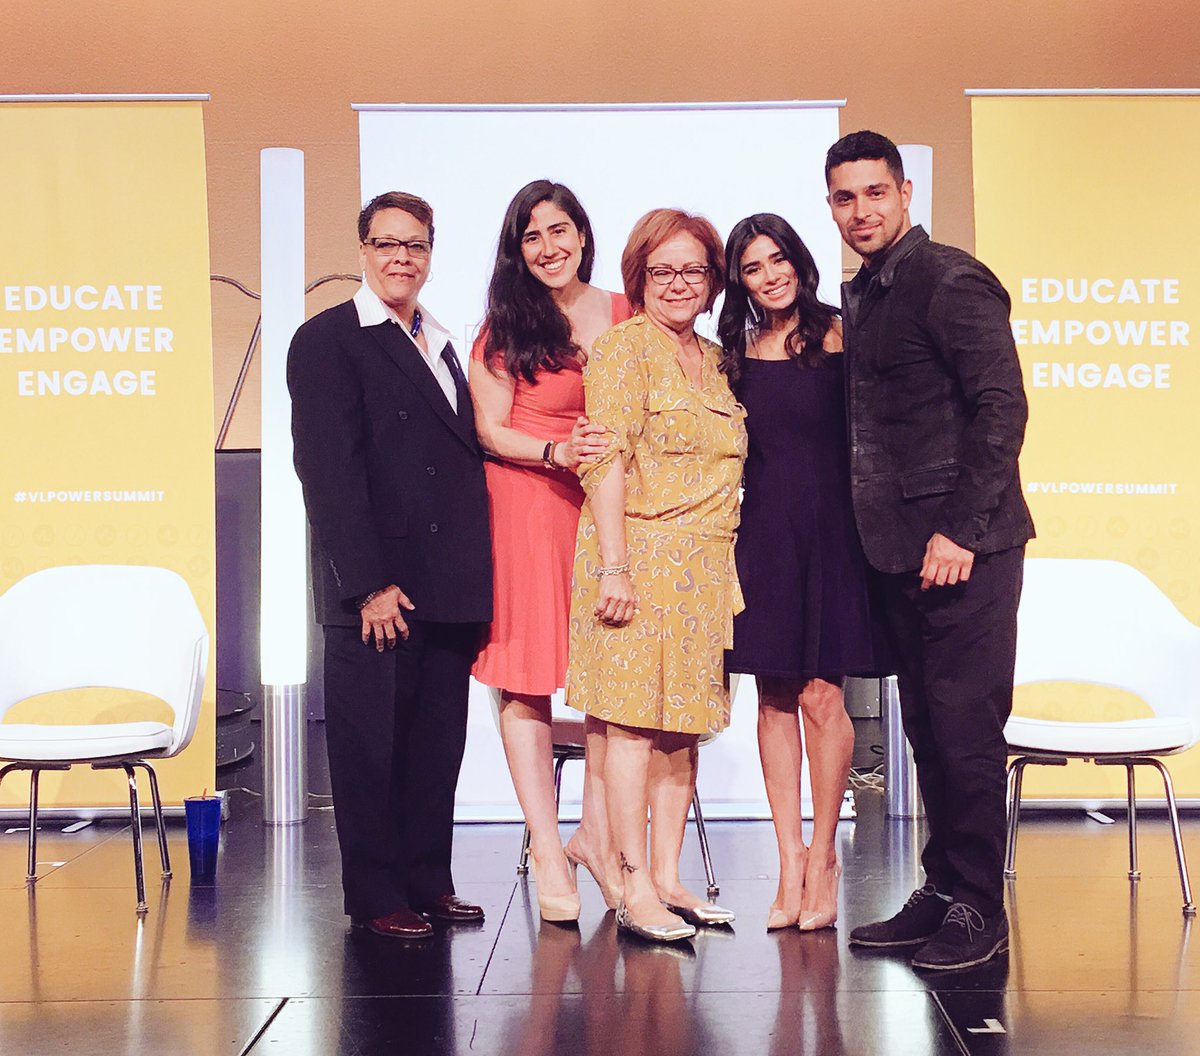 RT @WValderrama: So inspired to have shared the #VLPowerSummit panel with this incredible women.. #votolatino https://t.co/EcP0bTQSmD